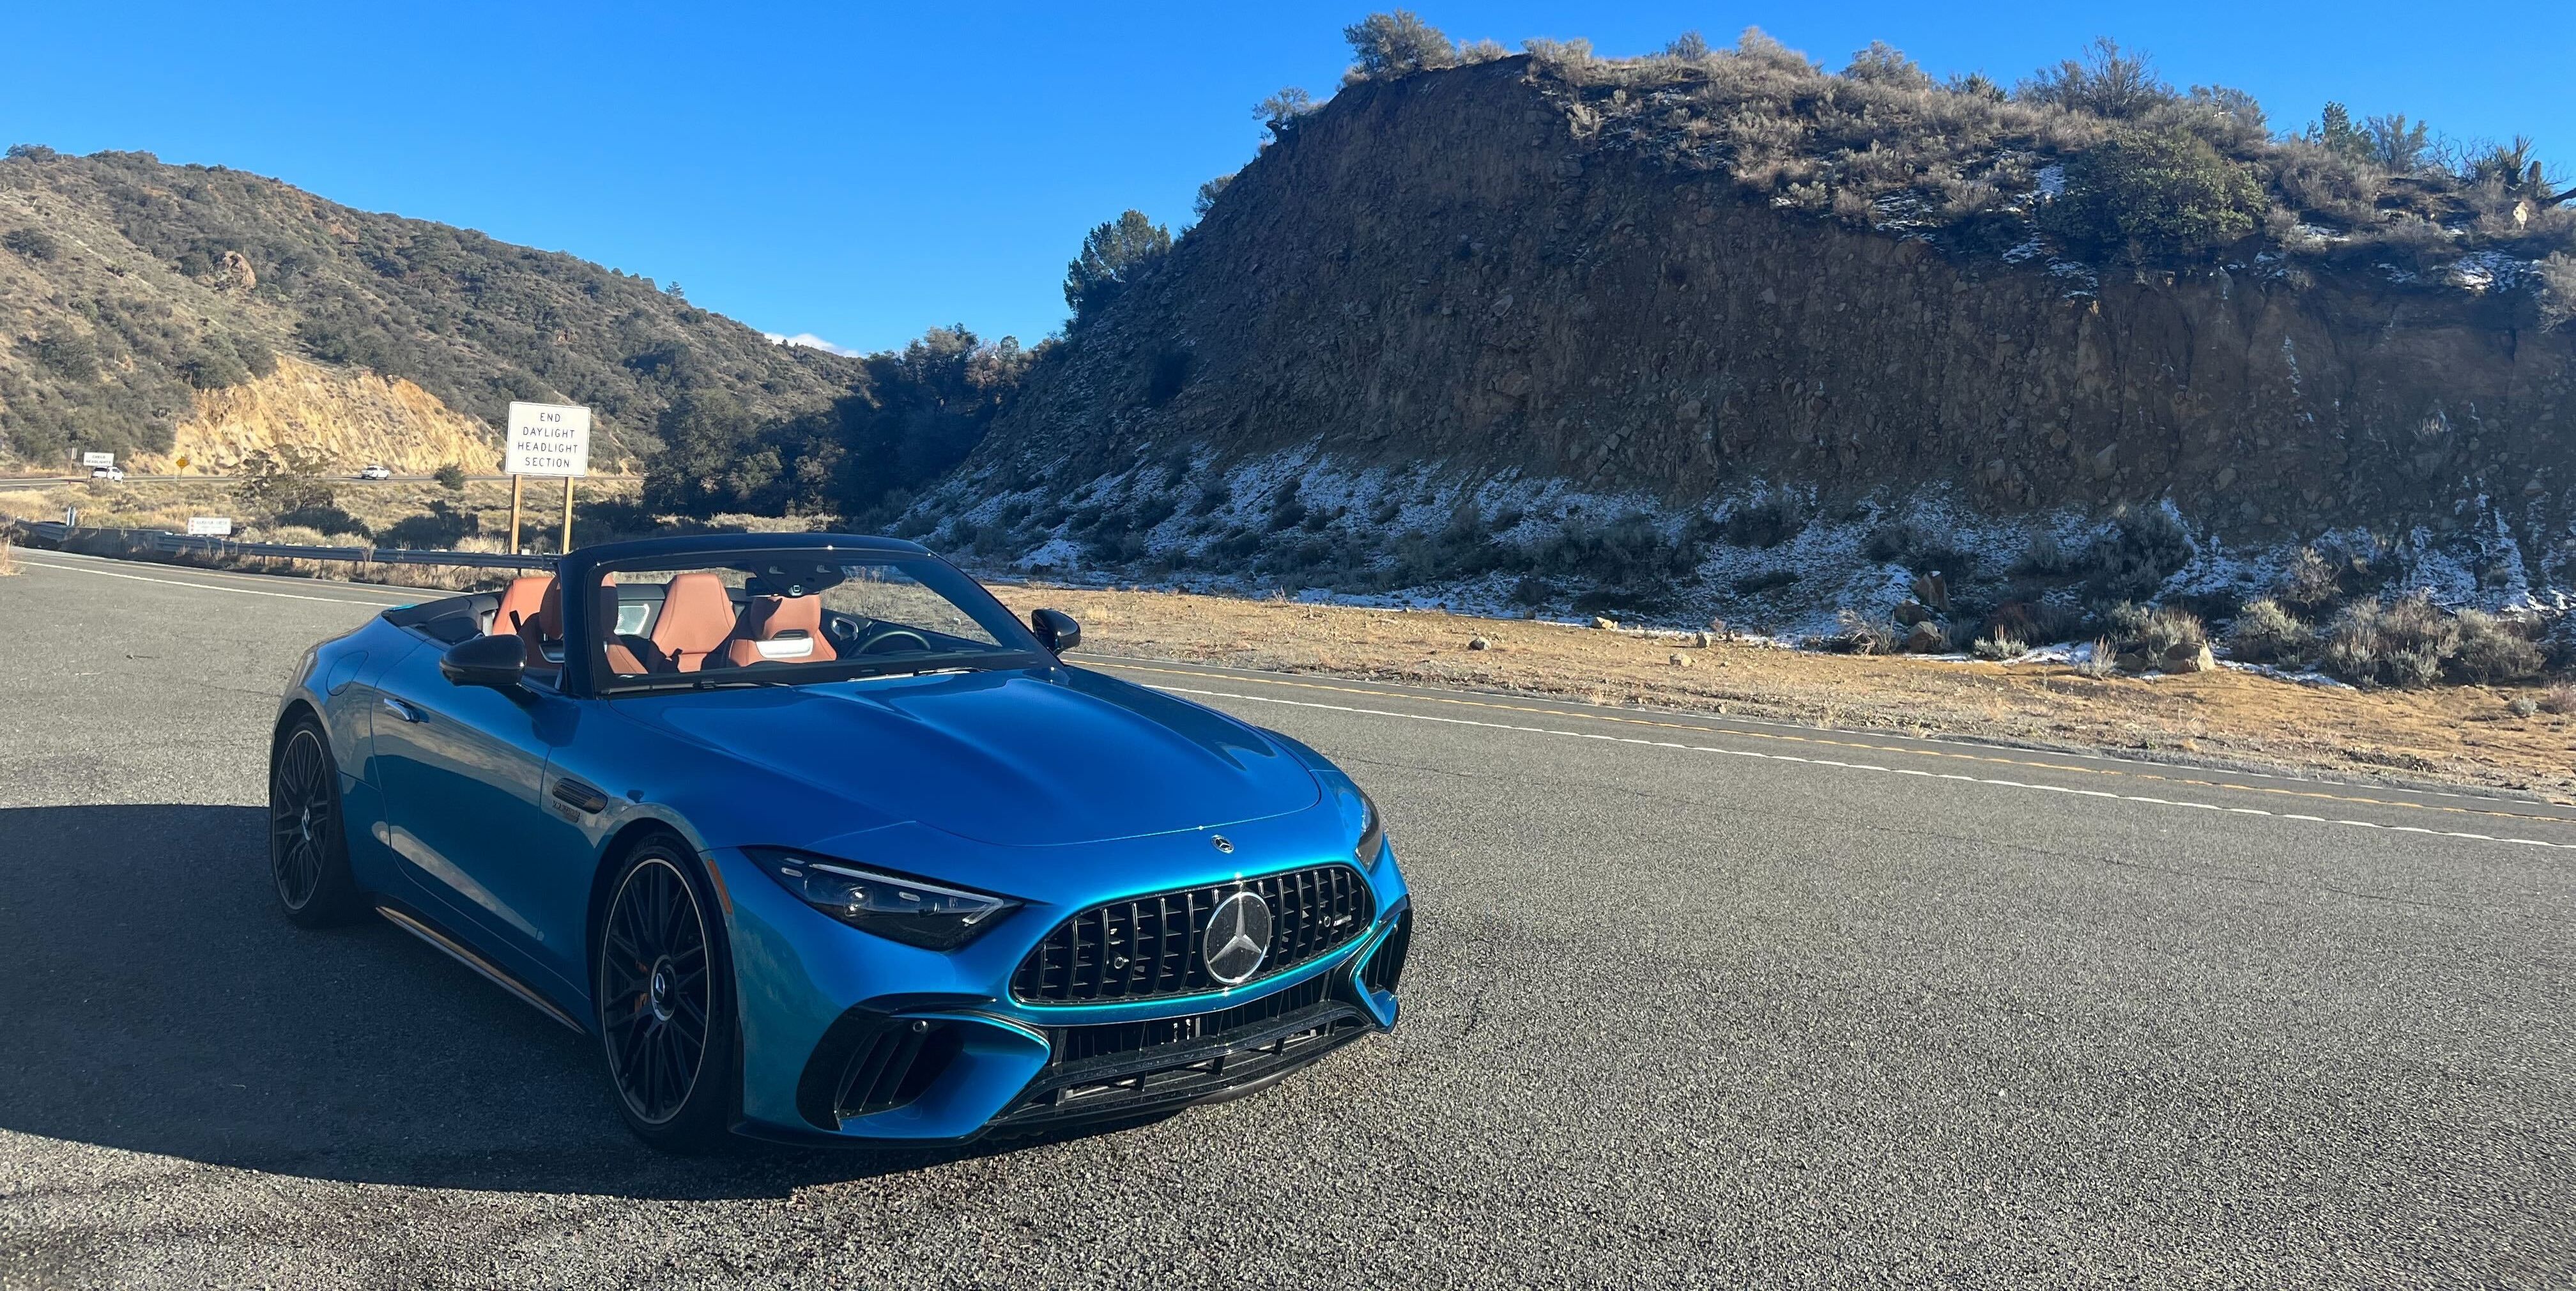 The Mercedes-AMG SL Is Everything We Love (and Hate) About Modern Cars